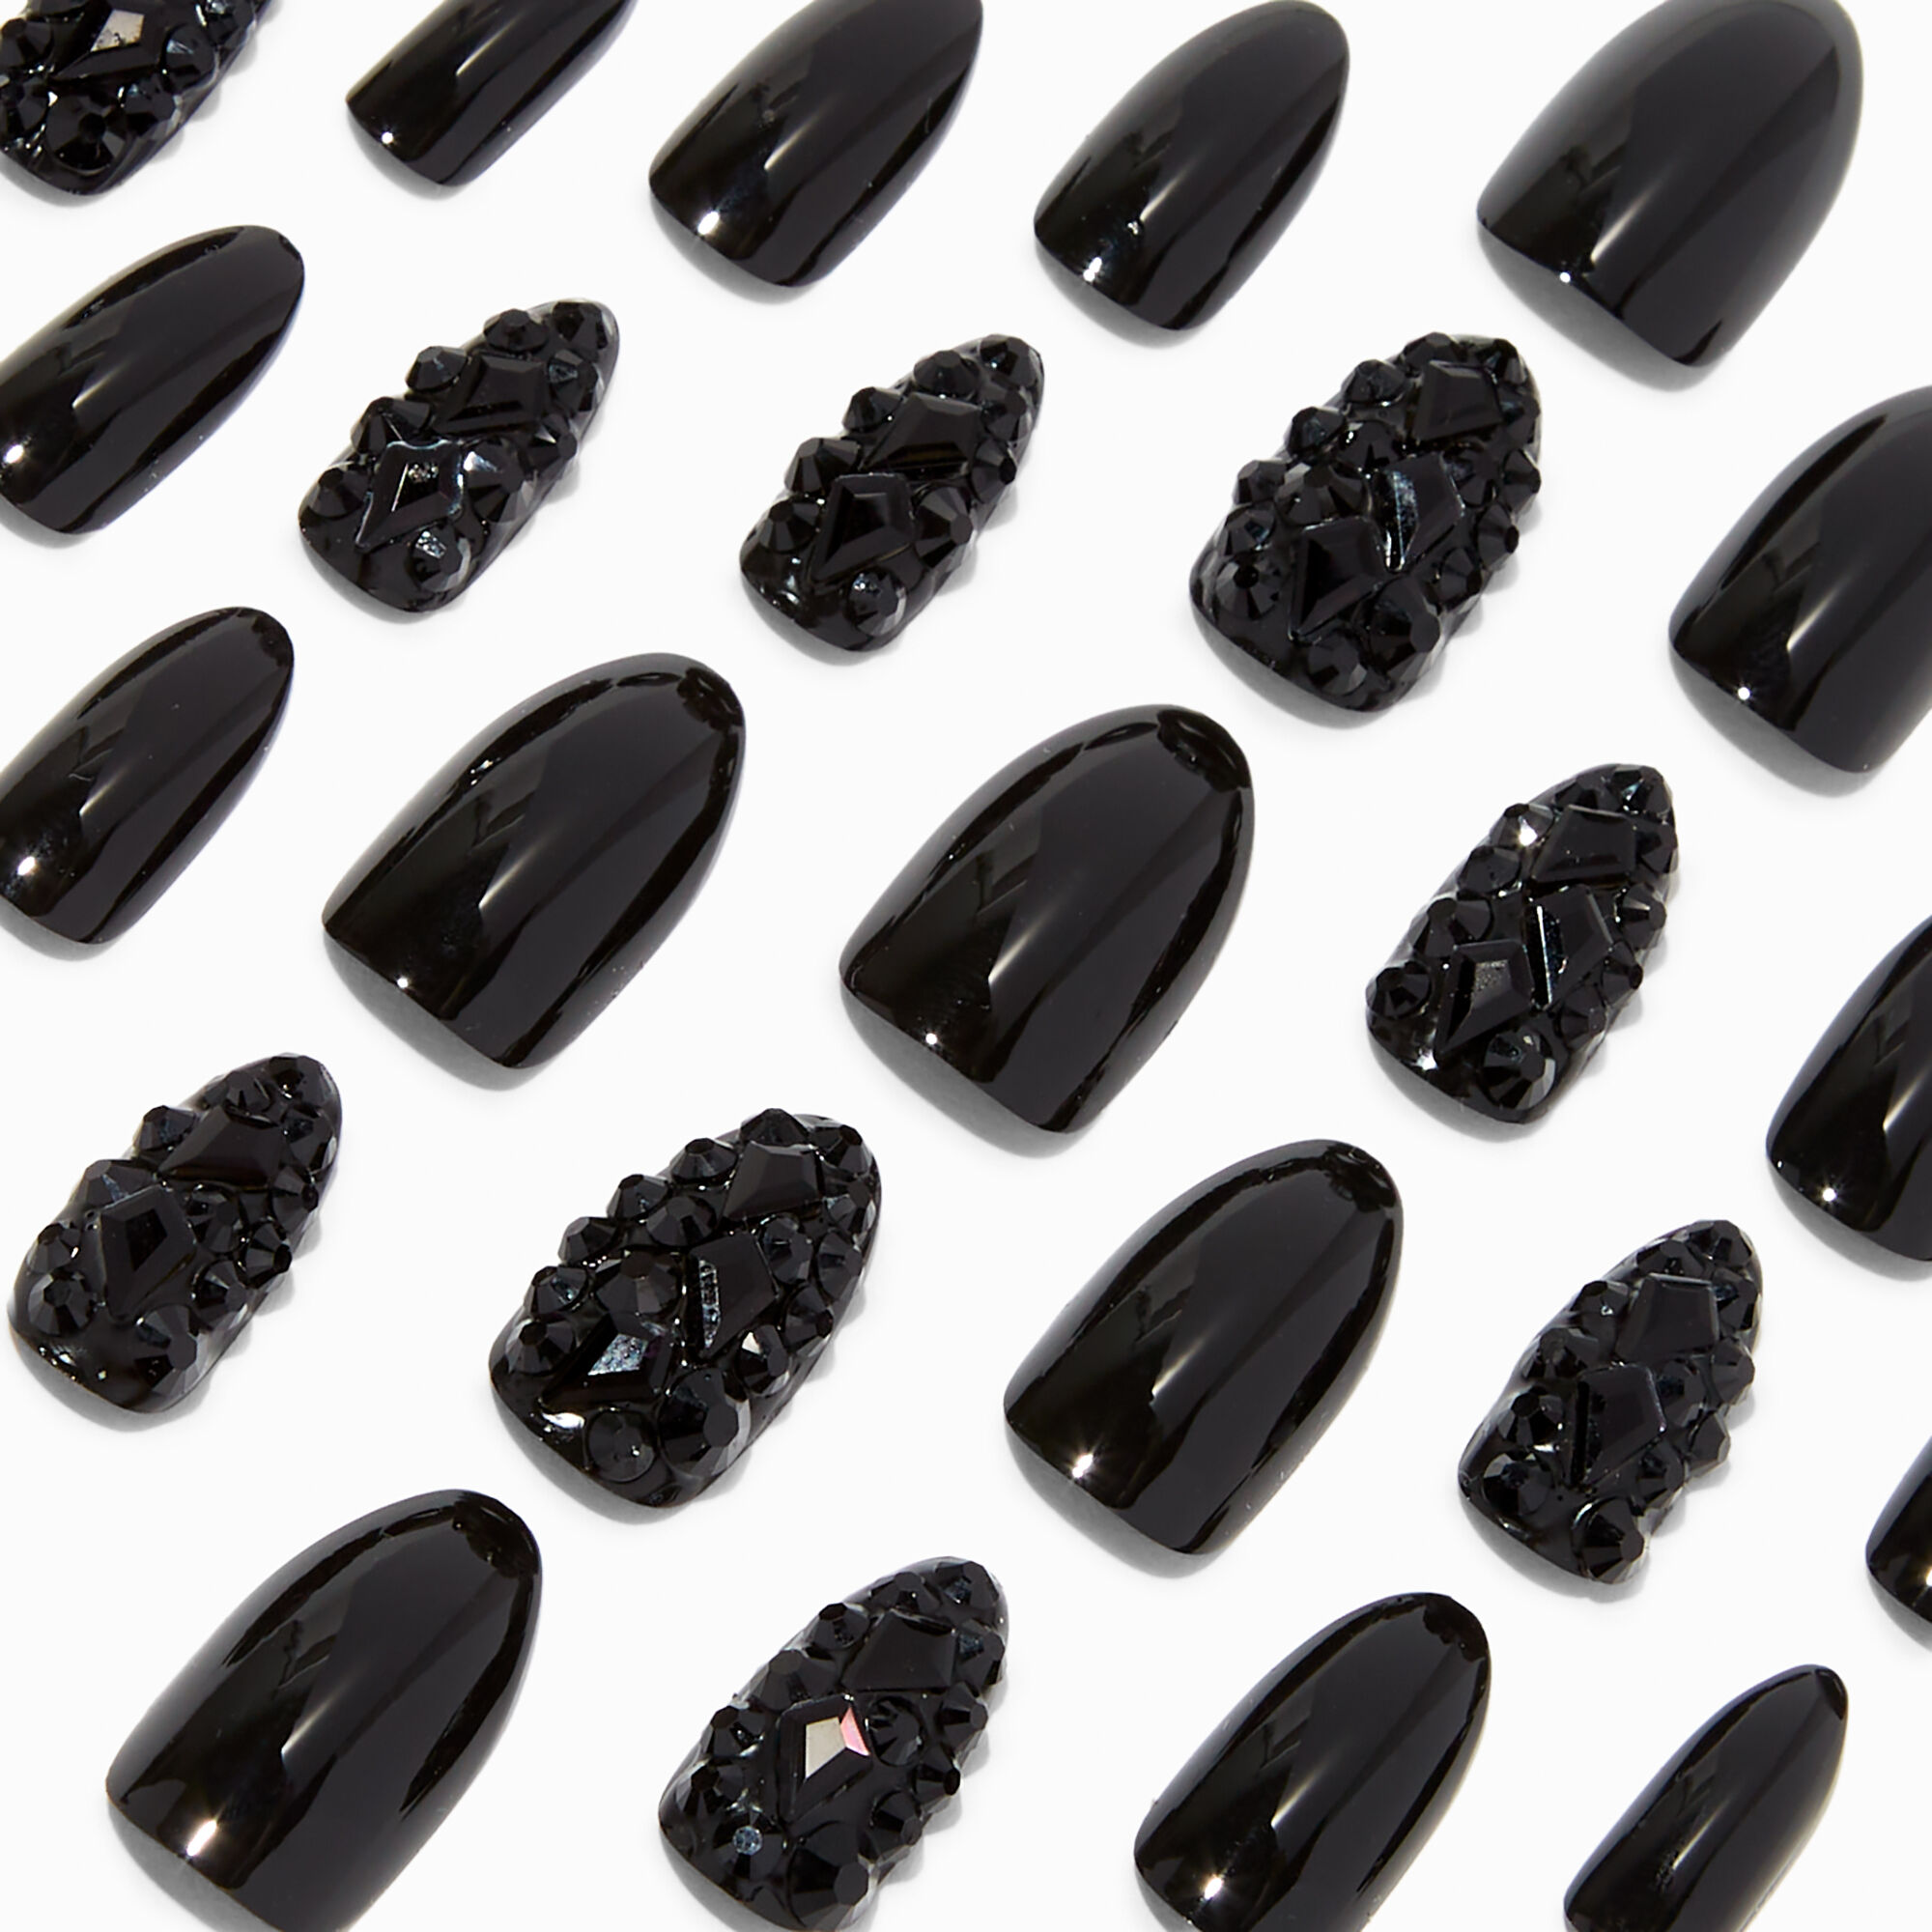 View Claires Extra Bling Stiletto Vegan Faux Nail Set 24 Pack Black information